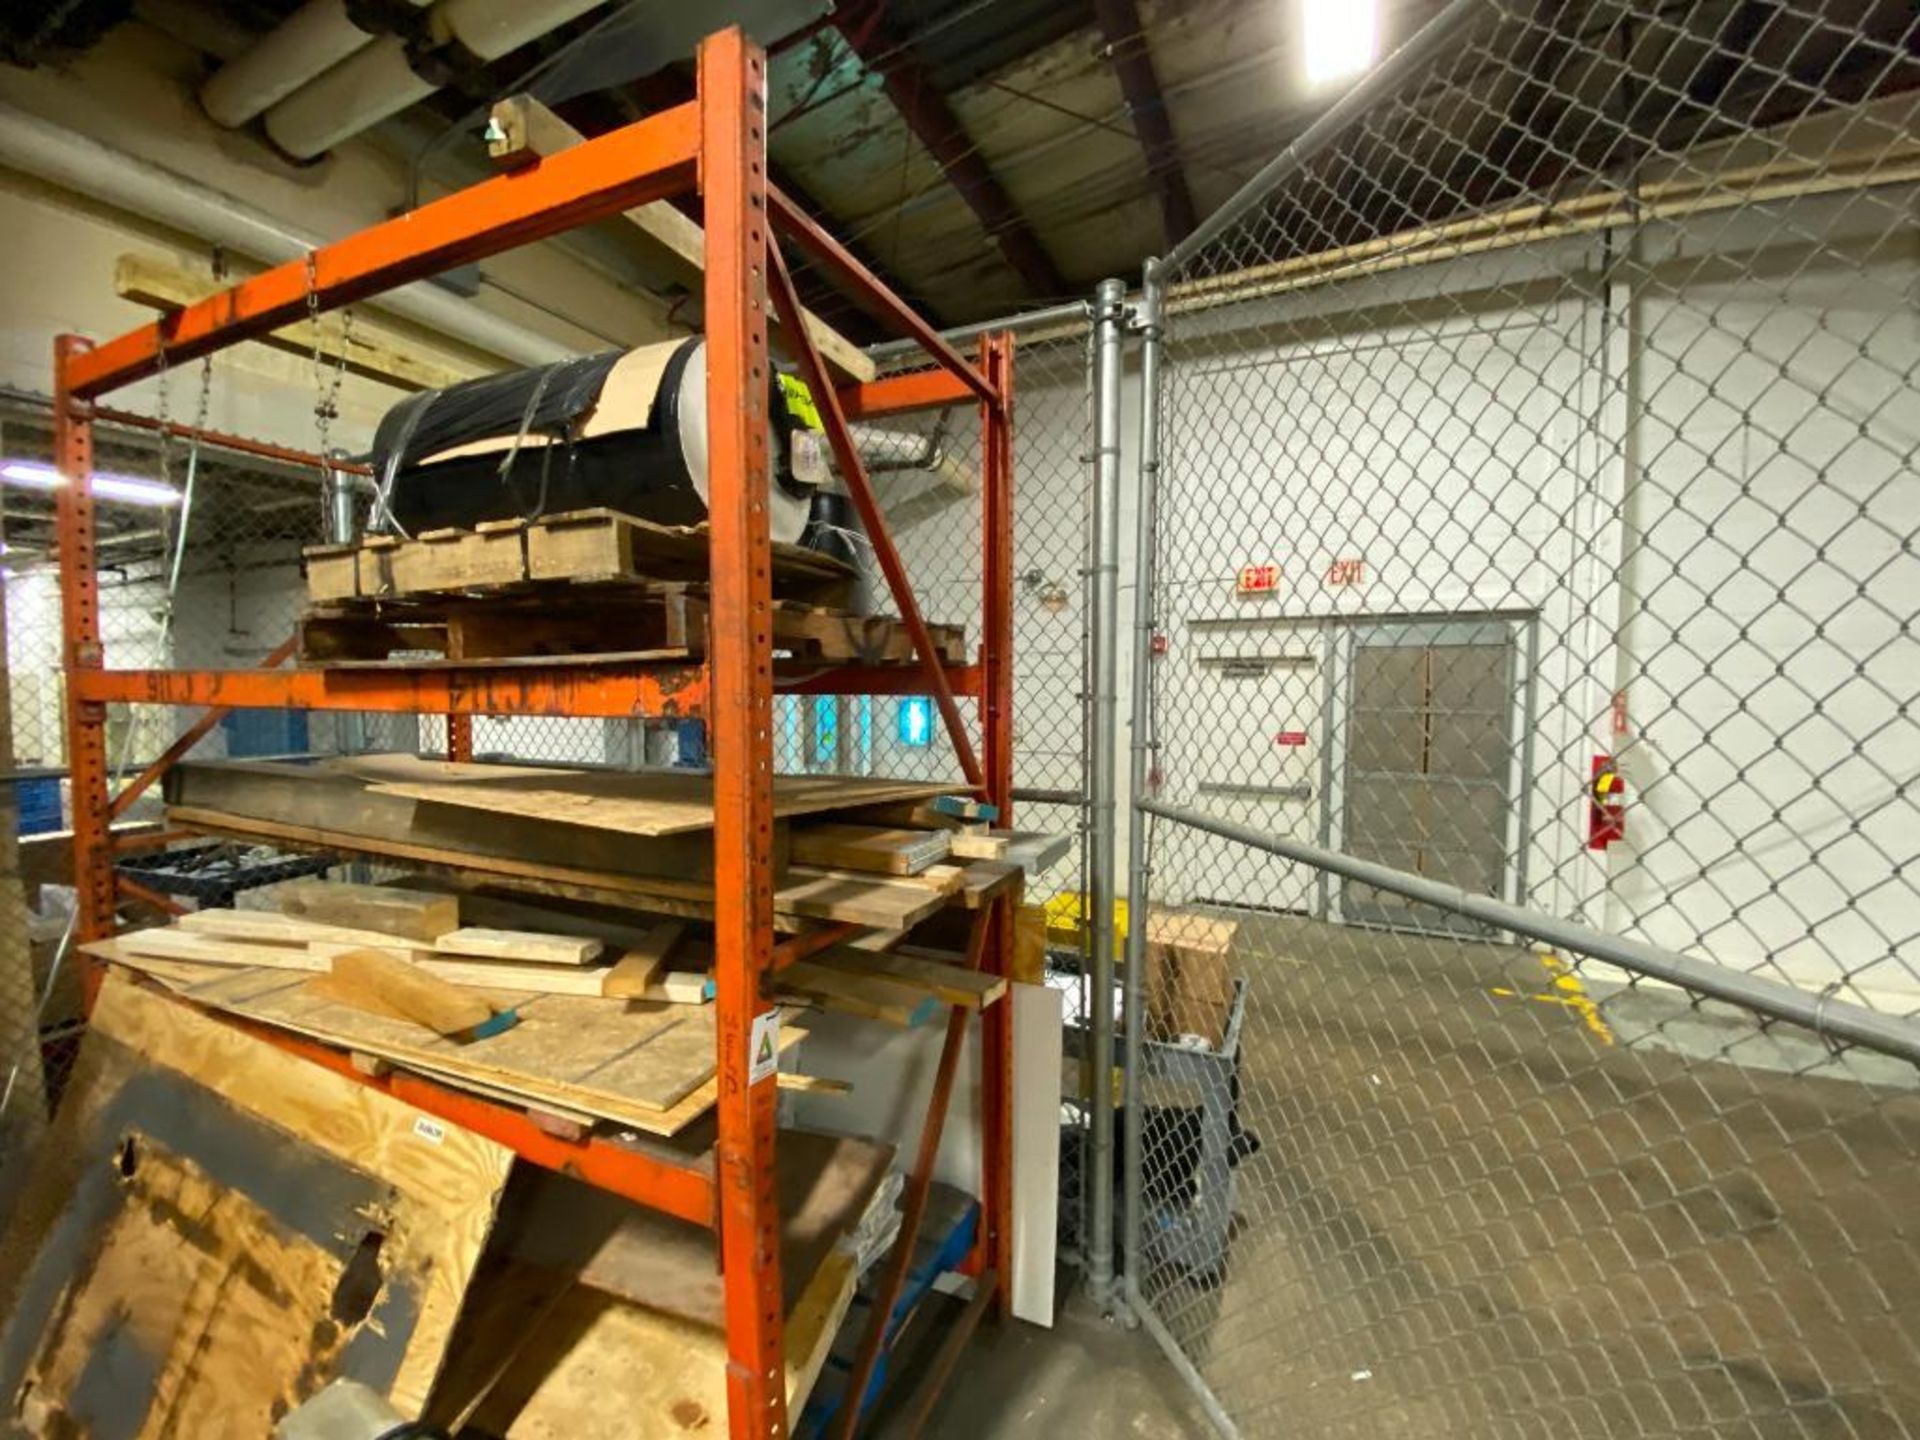 bolt together style pallet rack with contents, includes pallet of lighting, (2) shop vacuums, pallet